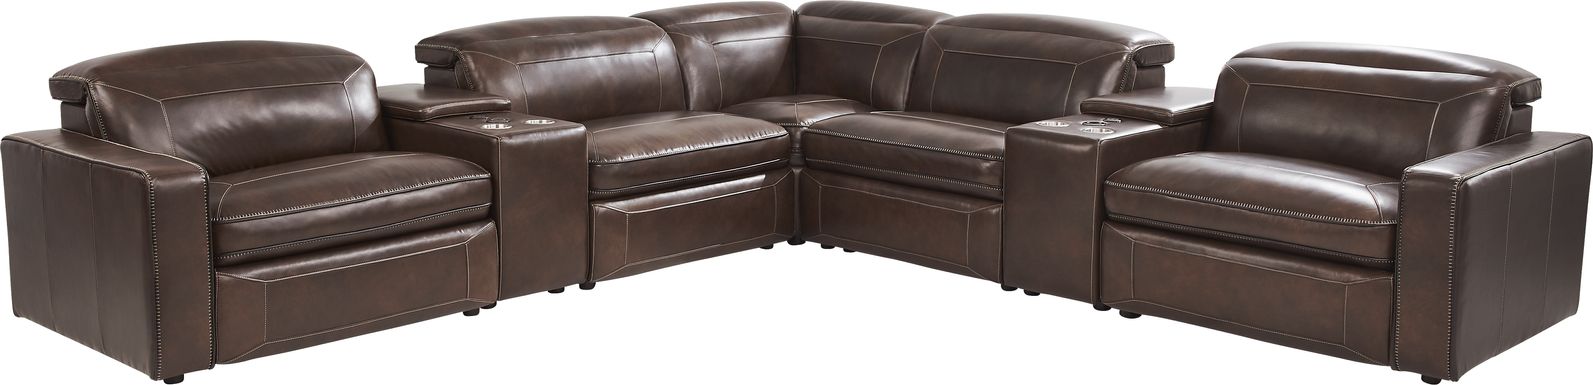 Terralinia Leather 7 Pc Dual Power Reclining Sectional